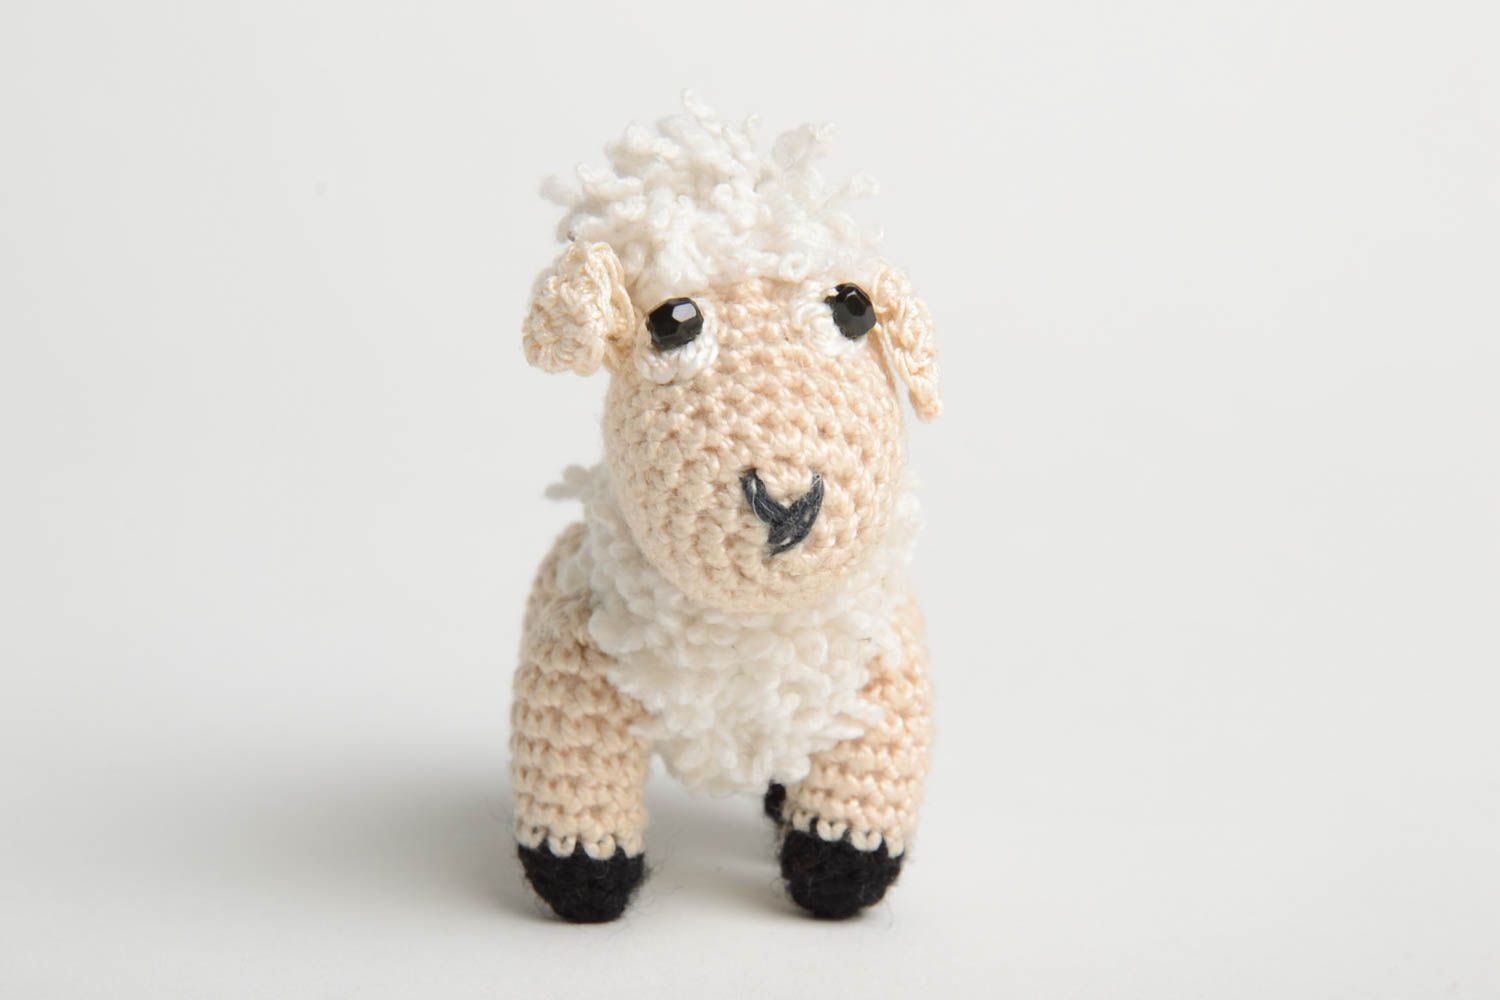 Handmade toy designer toy decor ideas crocheted toy gift for baby animal toy photo 2